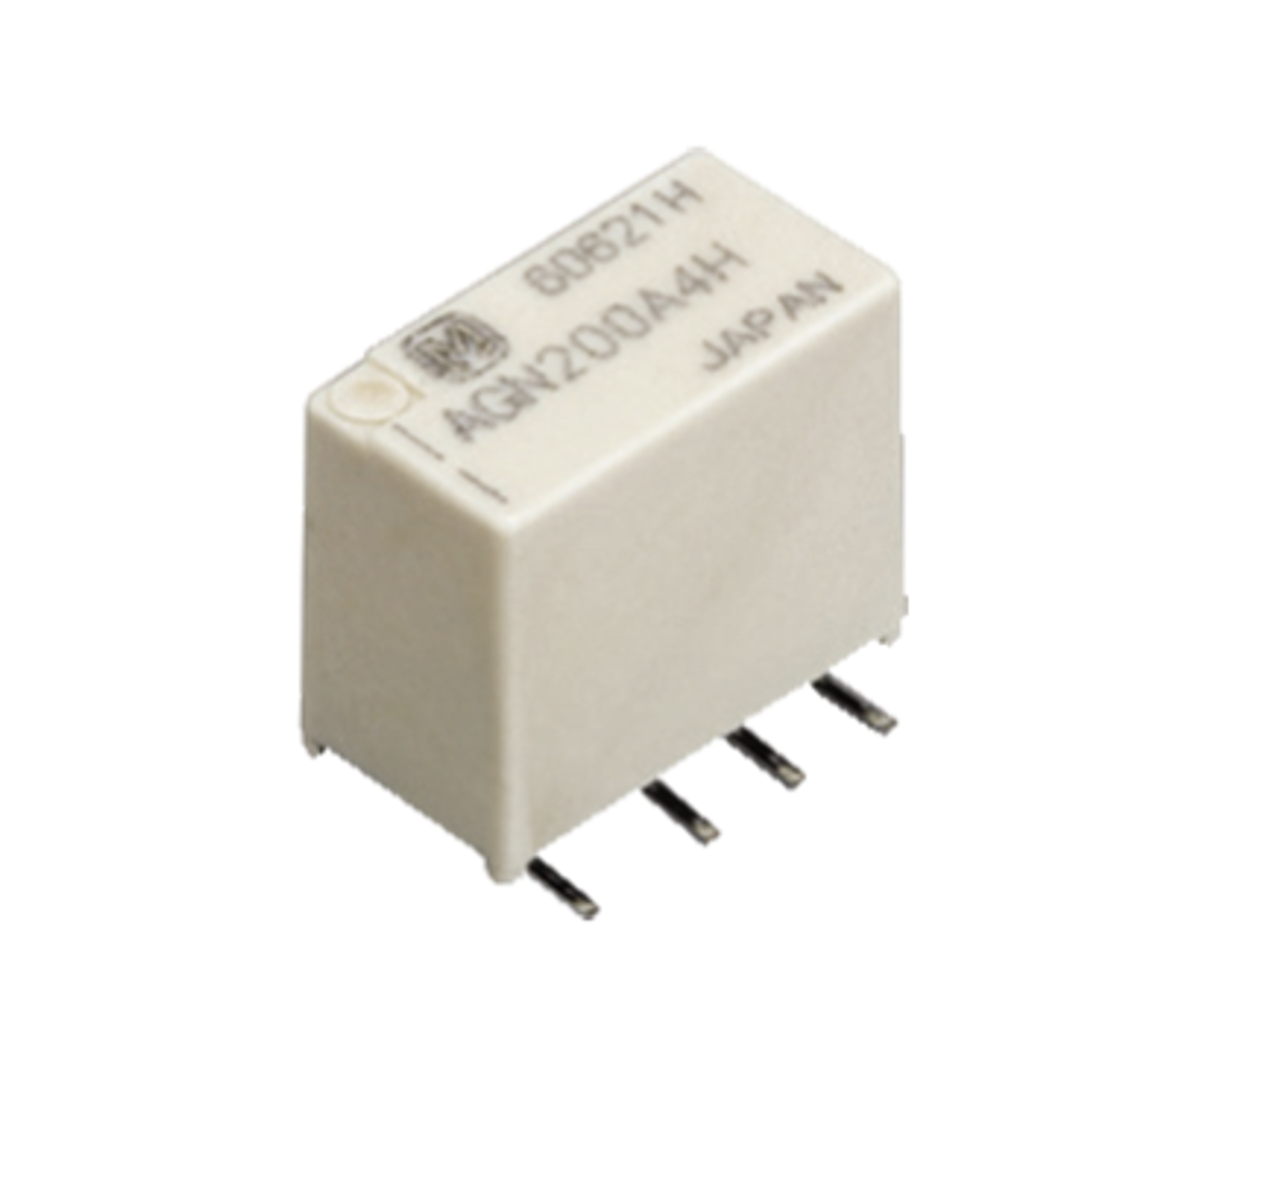 Panasonic Electric Works AGN210A12Z Signal Relays